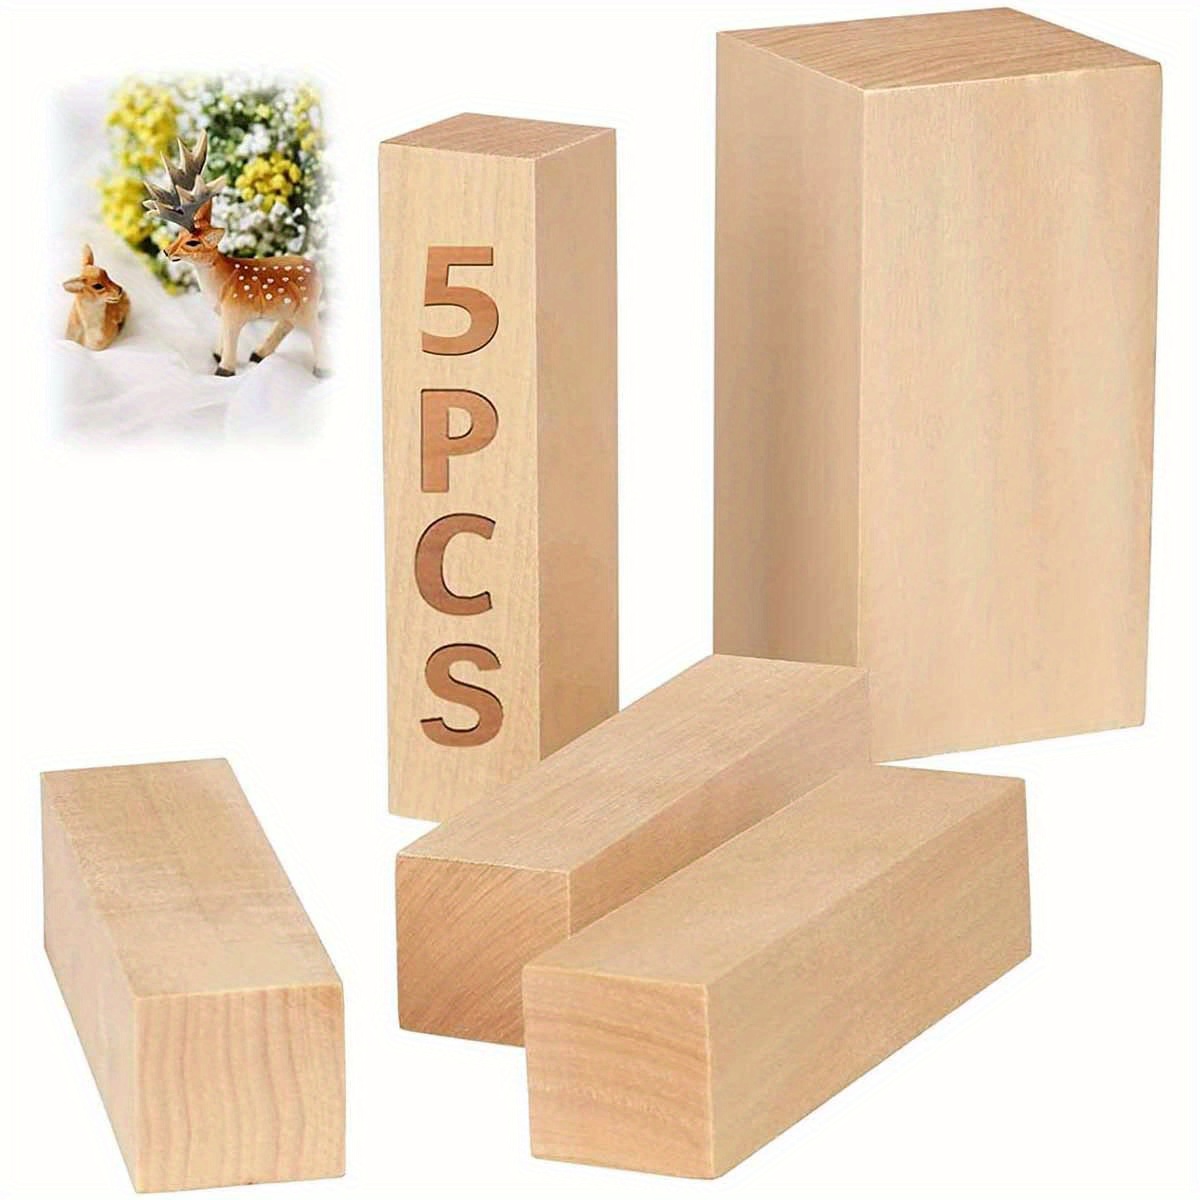 Rnlawks 12pcs Basswood Carving Block Natural Soft Wood Carving Block 3 Sizes Portable Unfinished Wood Block Carving Whittling Art Supplies for